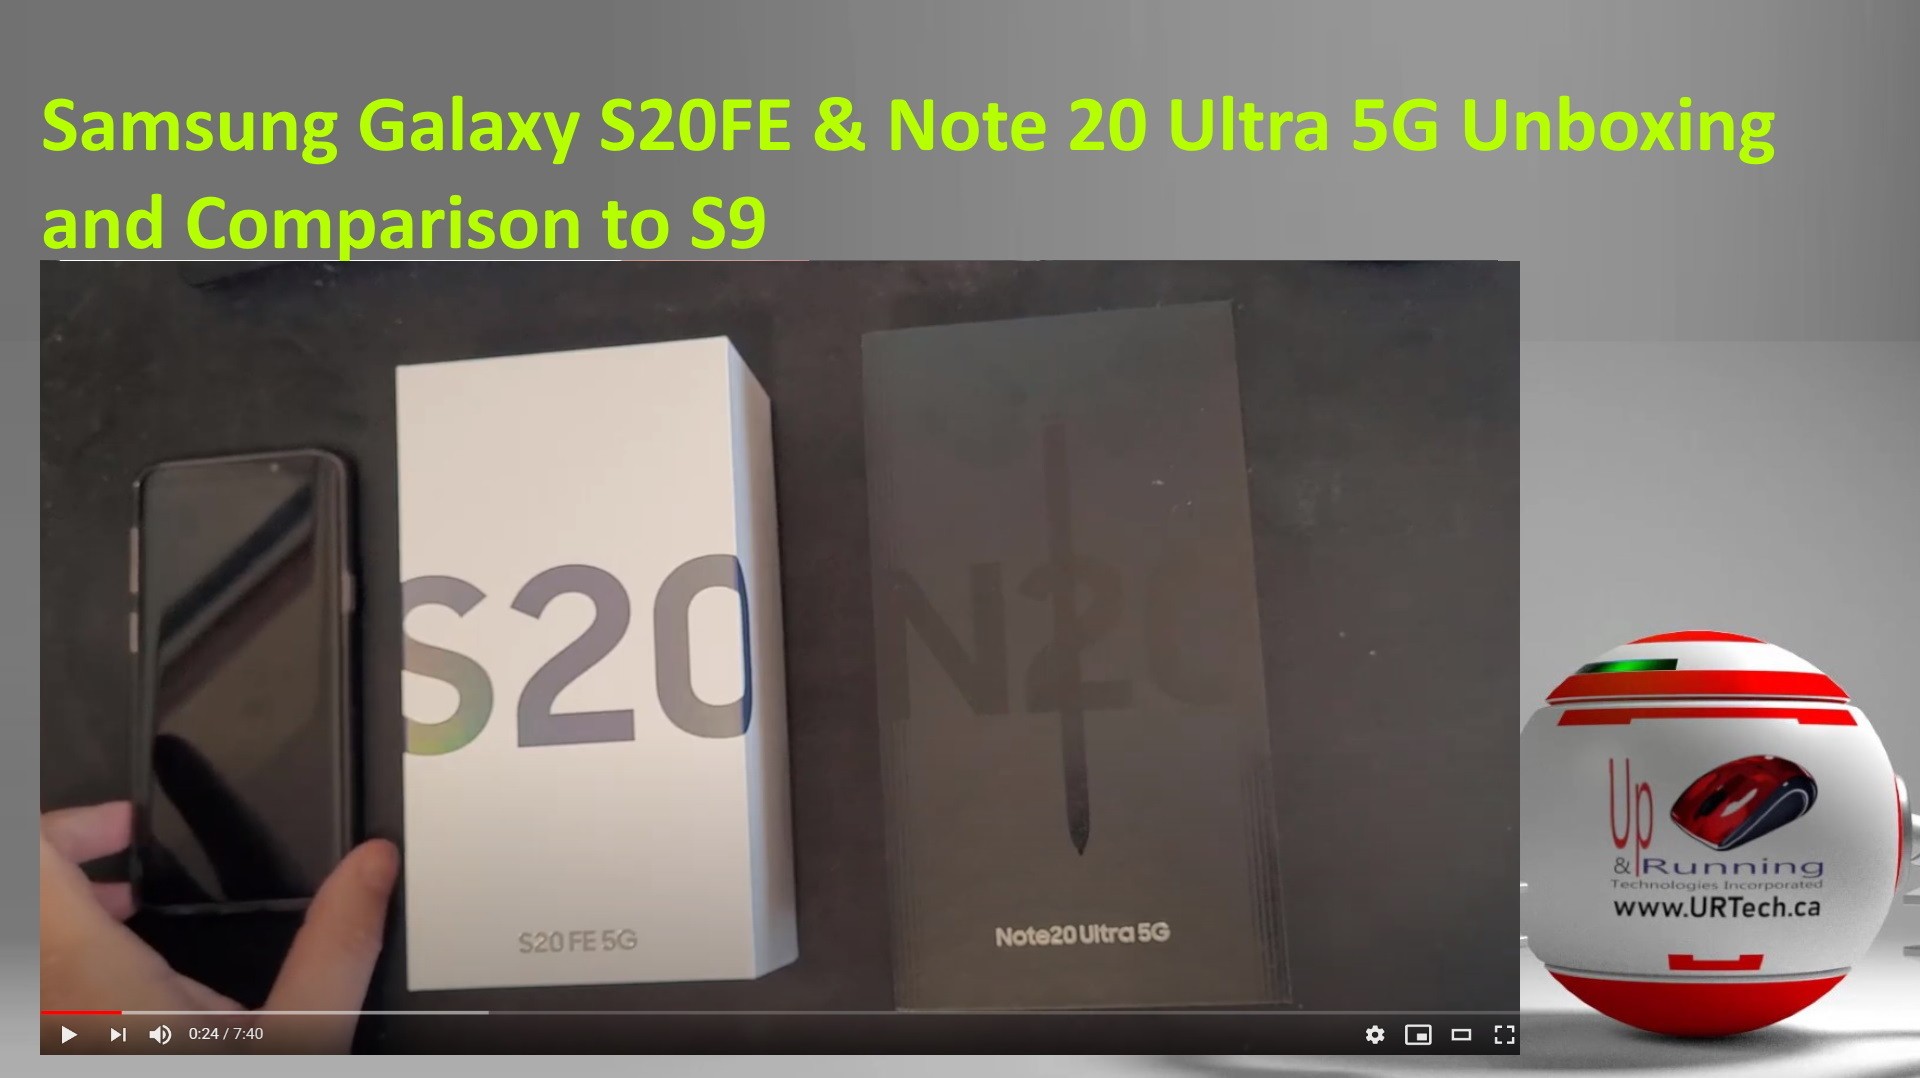 Samsung Galaxy S20FE and Note 20 Ultra 5G Unboxing and Comparison to S9